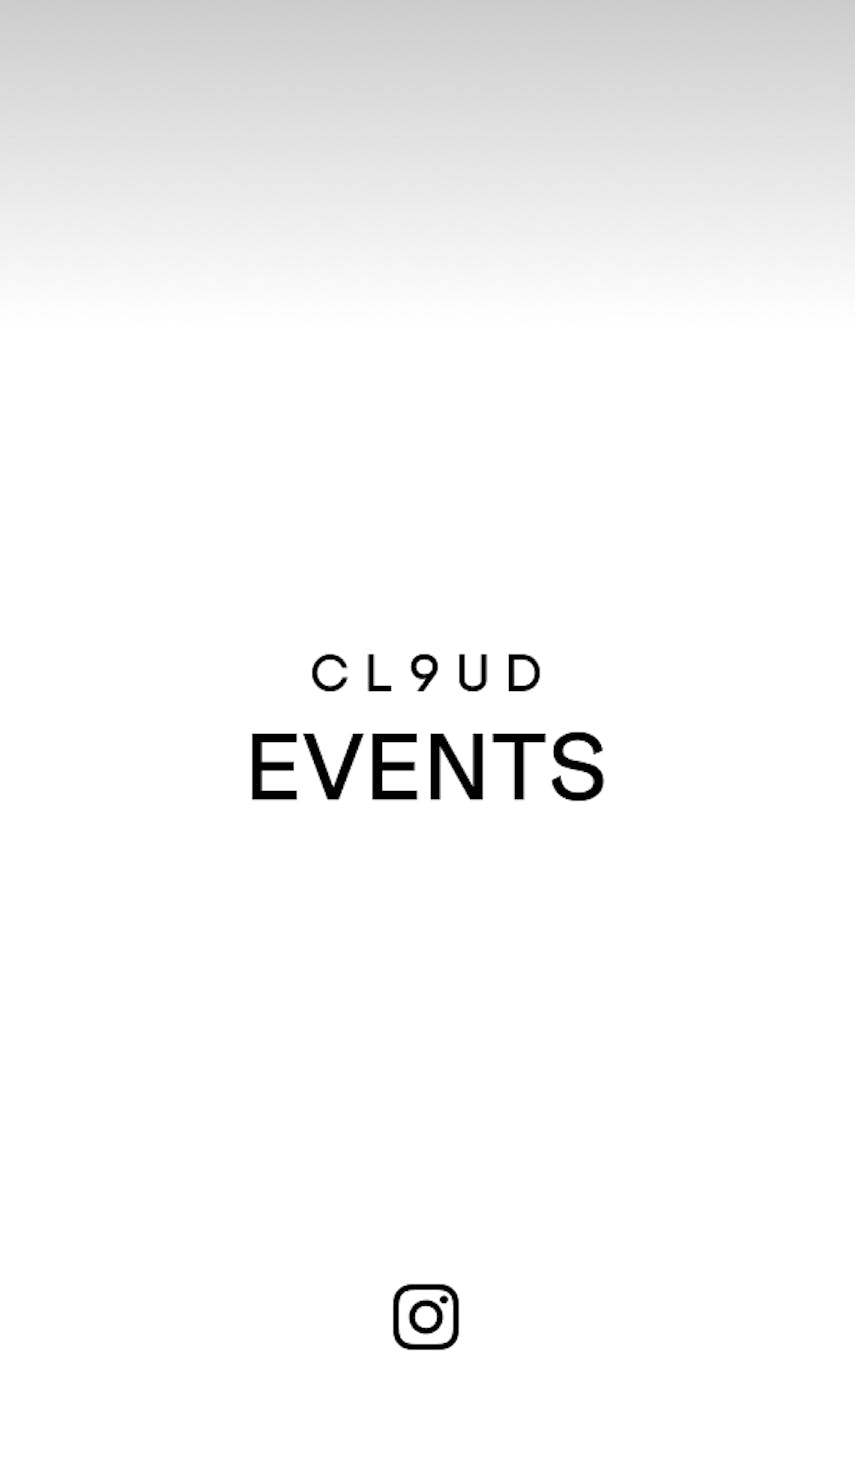 Cl9ud Events